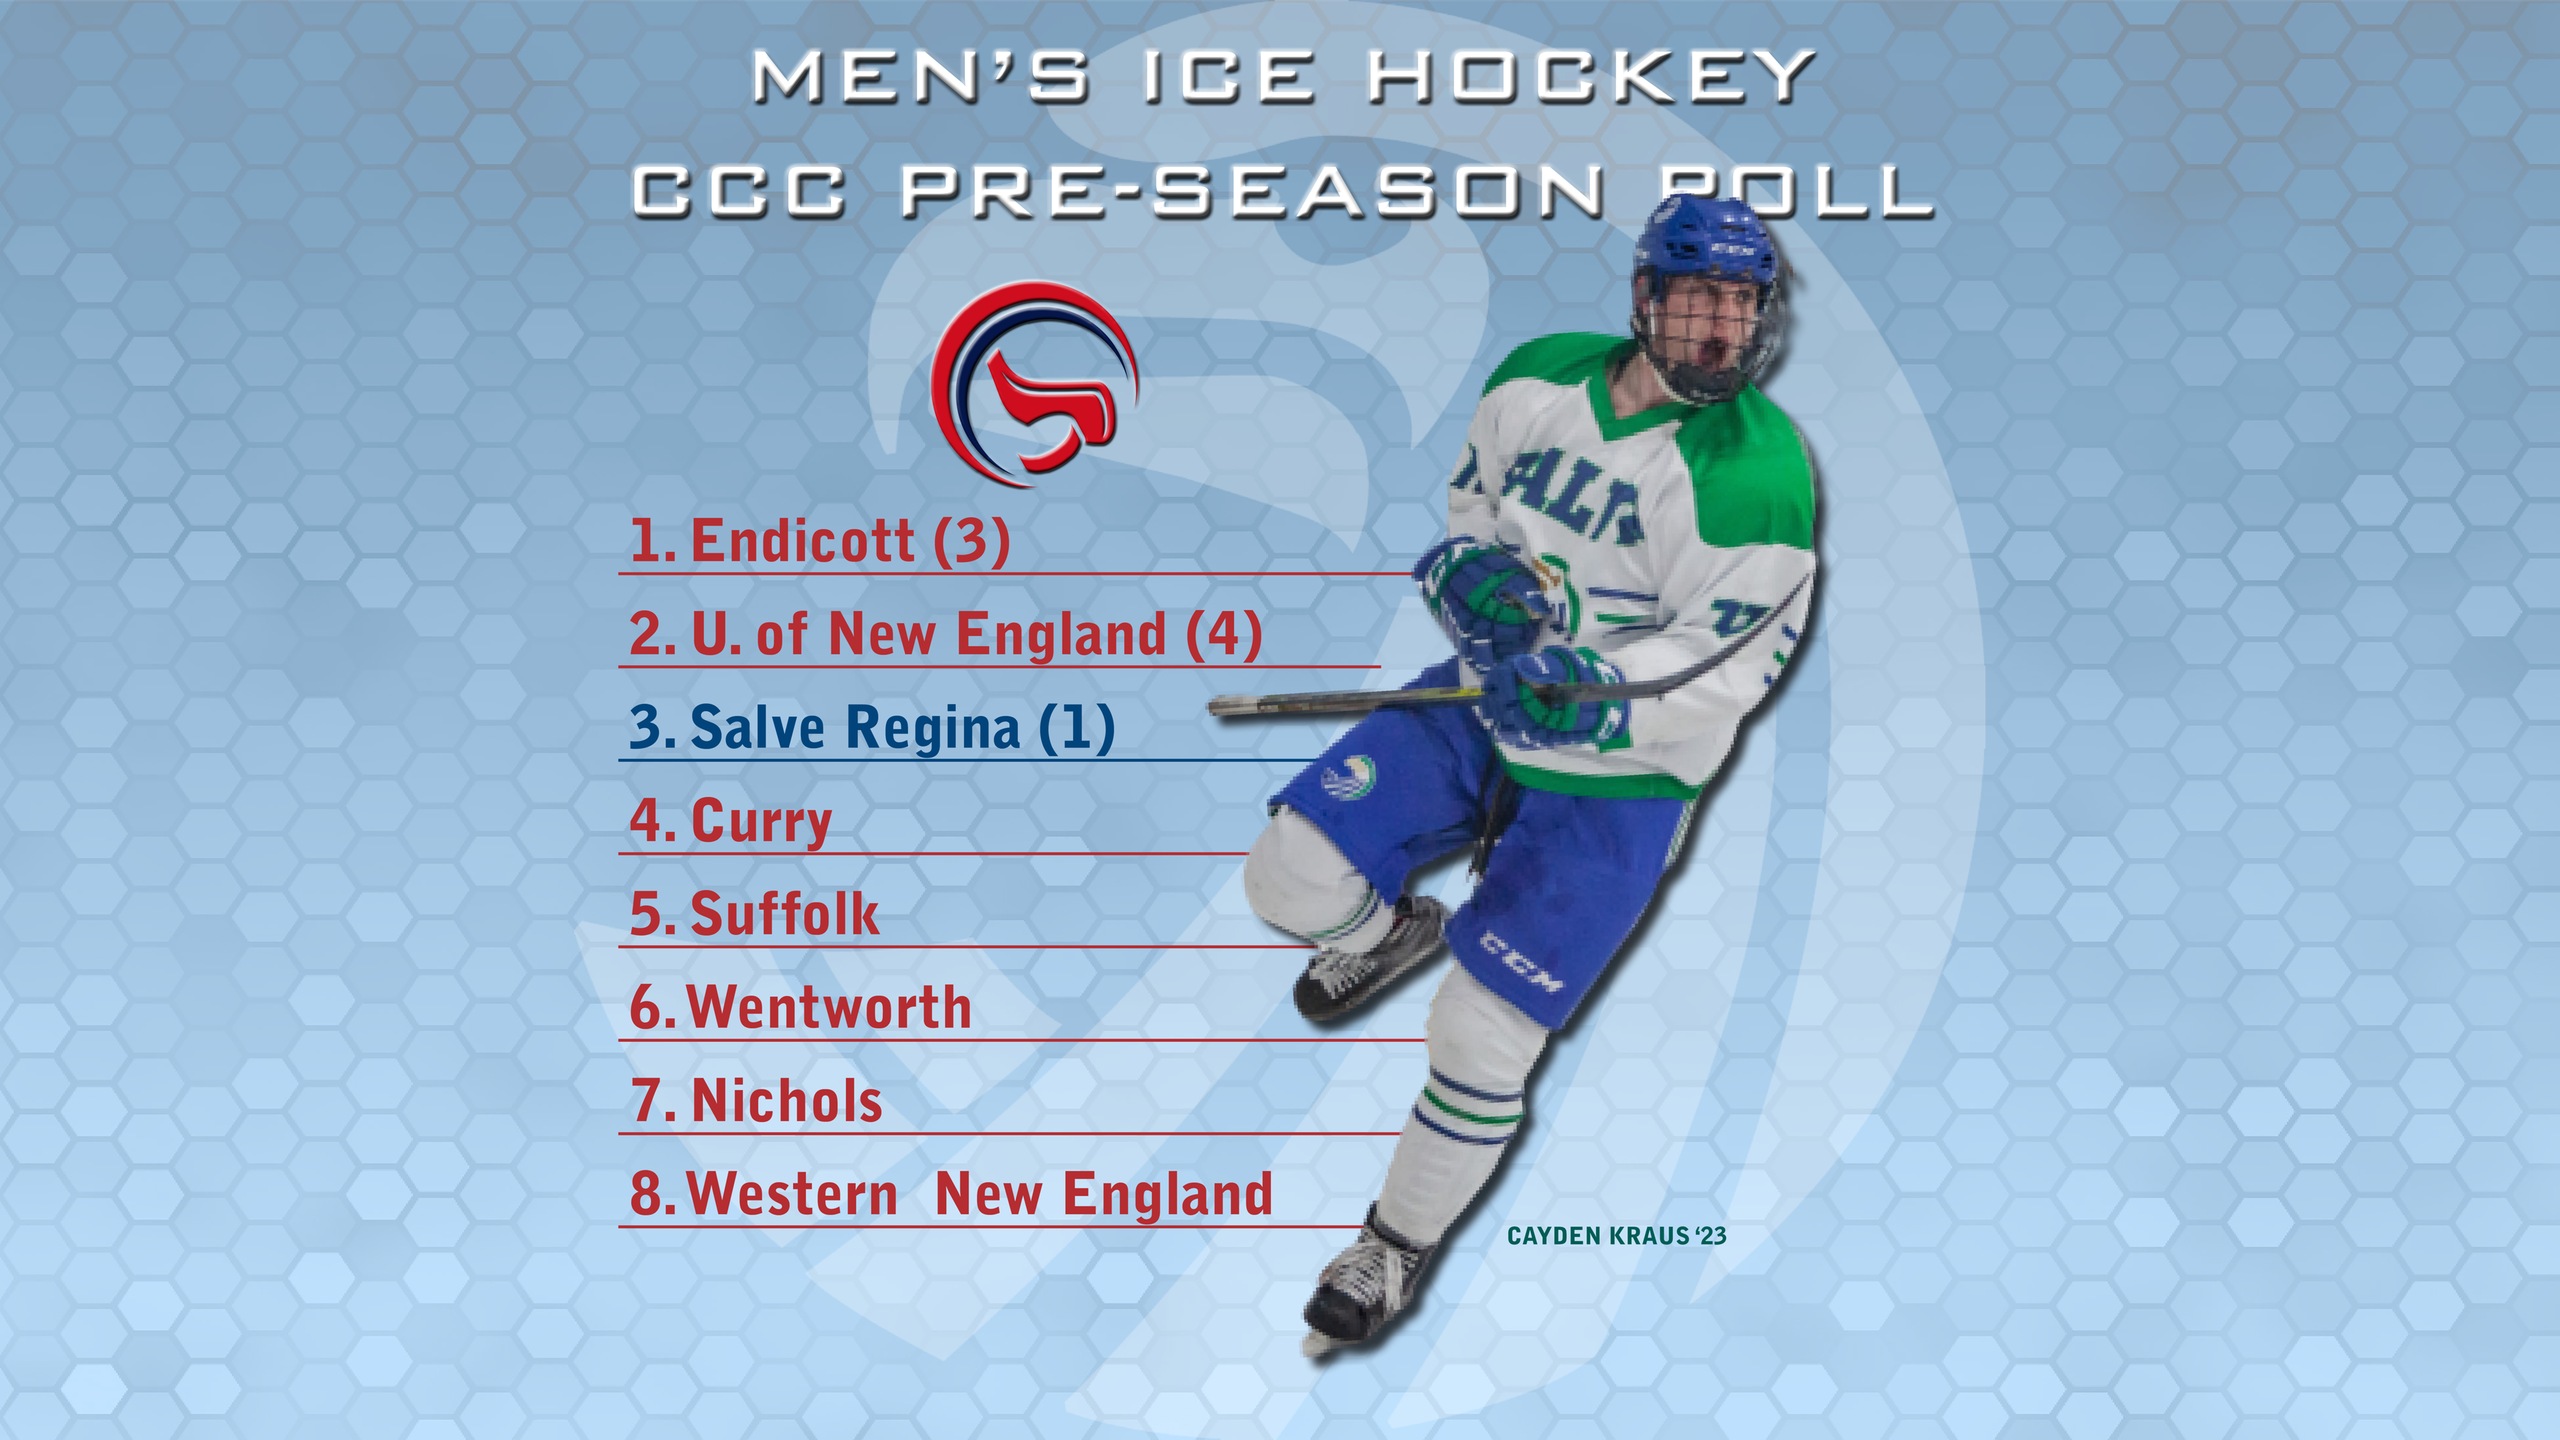 Salve Regina was picked third by the CCC coaches.